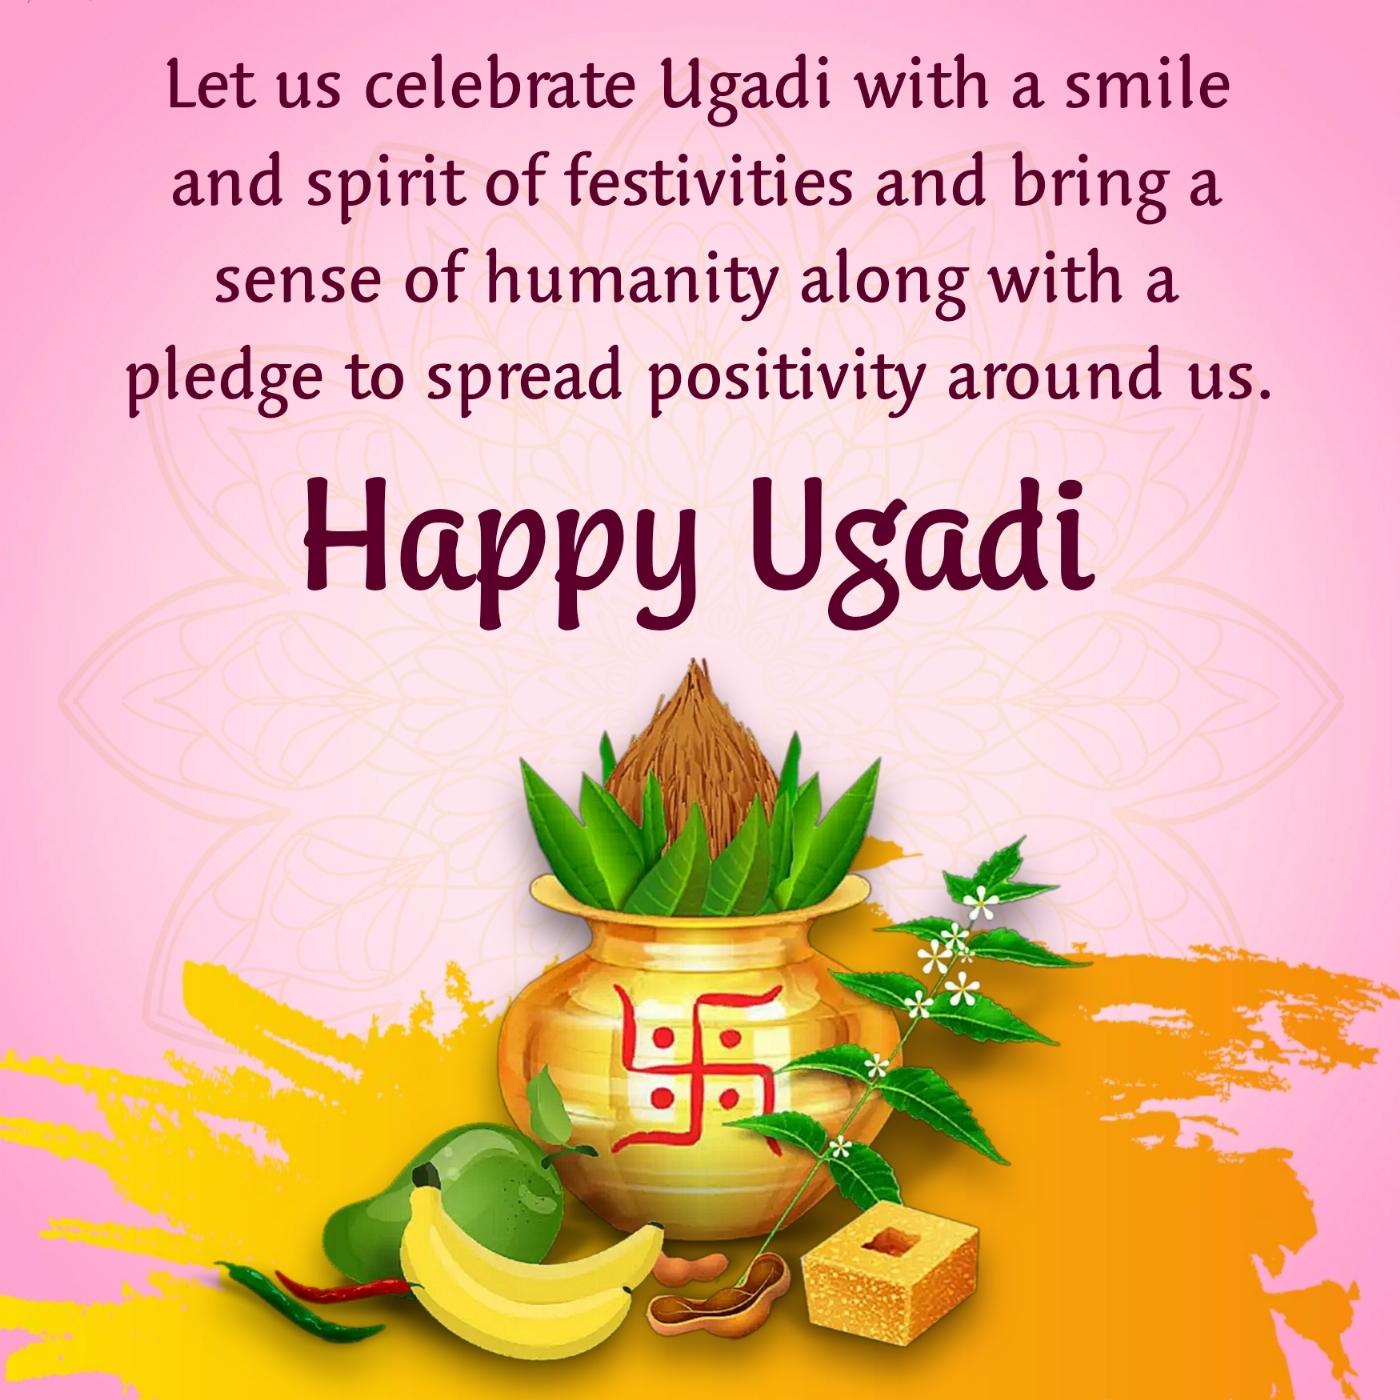 Let us celebrate Ugadi with a smile and spirit of festivities